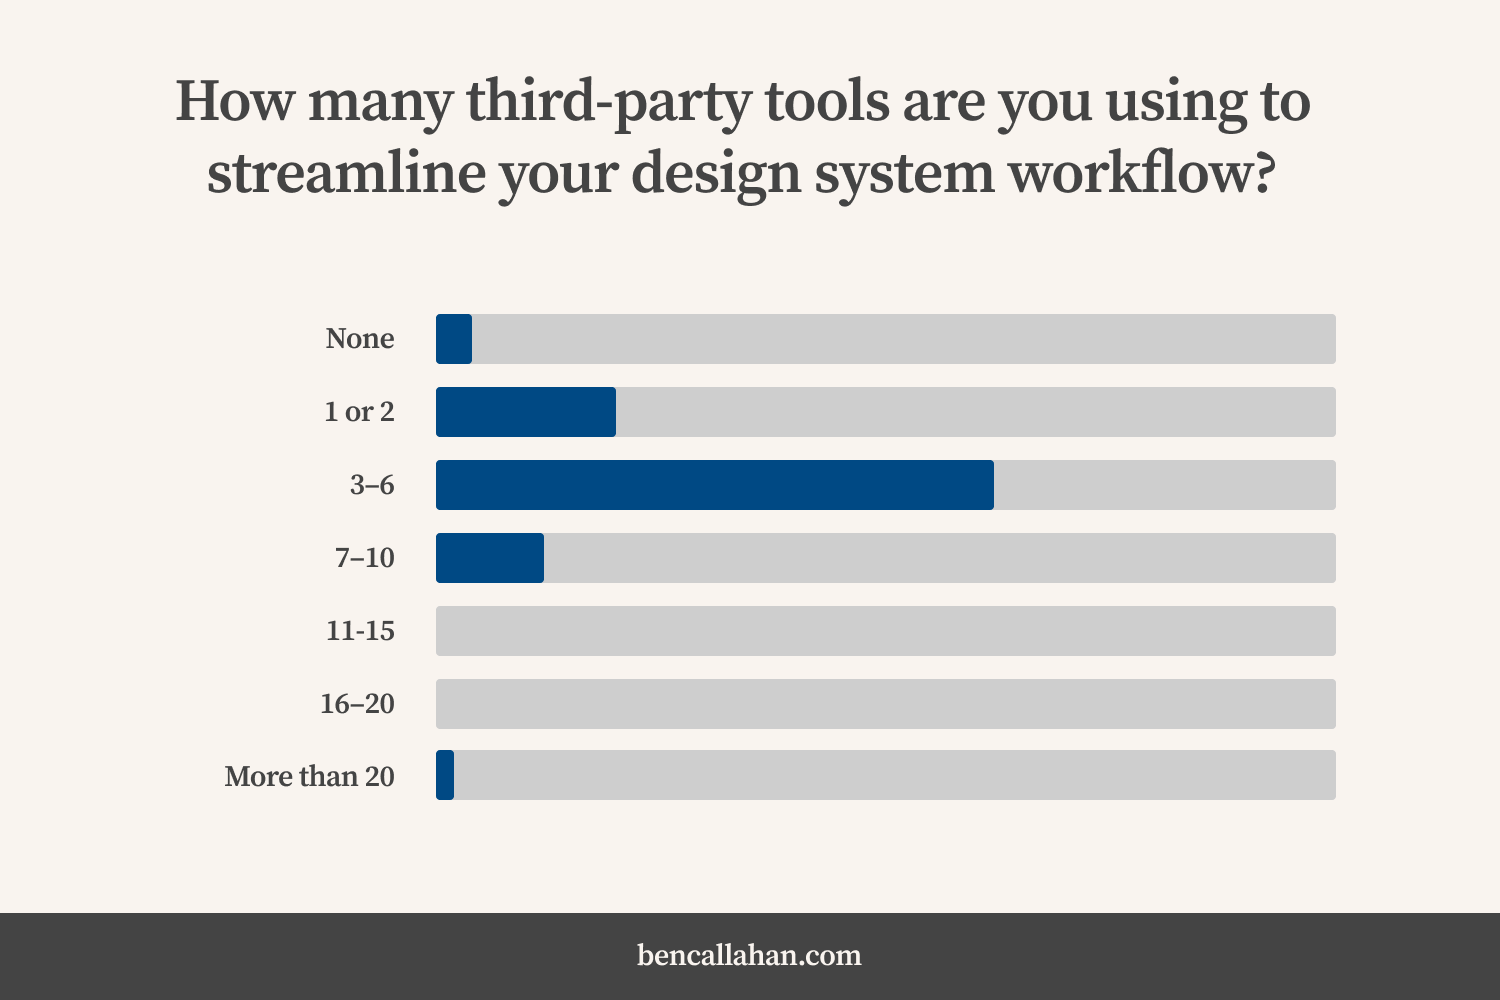 In response to the question, “How many third-party tools are you using to streamline your design system workflow?”: approximately 62% of respondents reported using between three and six third-party tools to streamline their design system workflow.